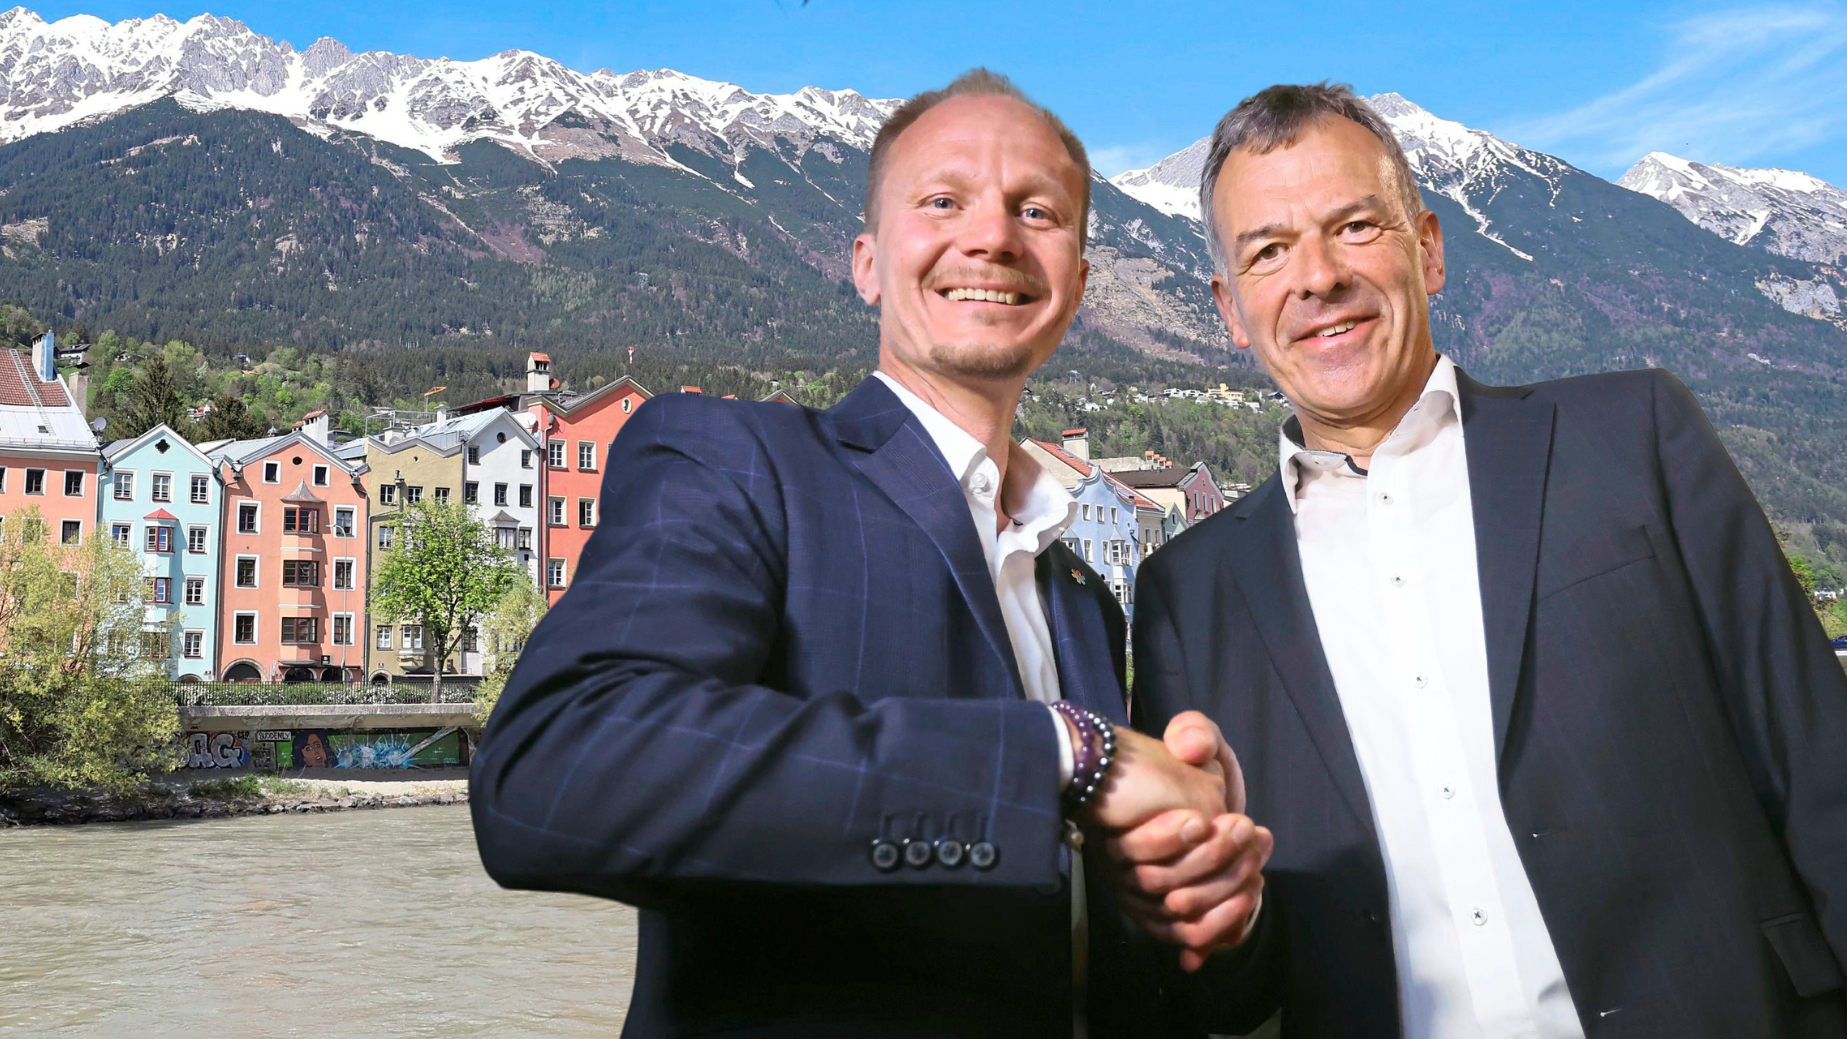 The decision on who will be mayor will be made in just two weeks' time. The chemistry between Anzengruber and Willi seems to fit. (Bild: Christof Birbaumer)